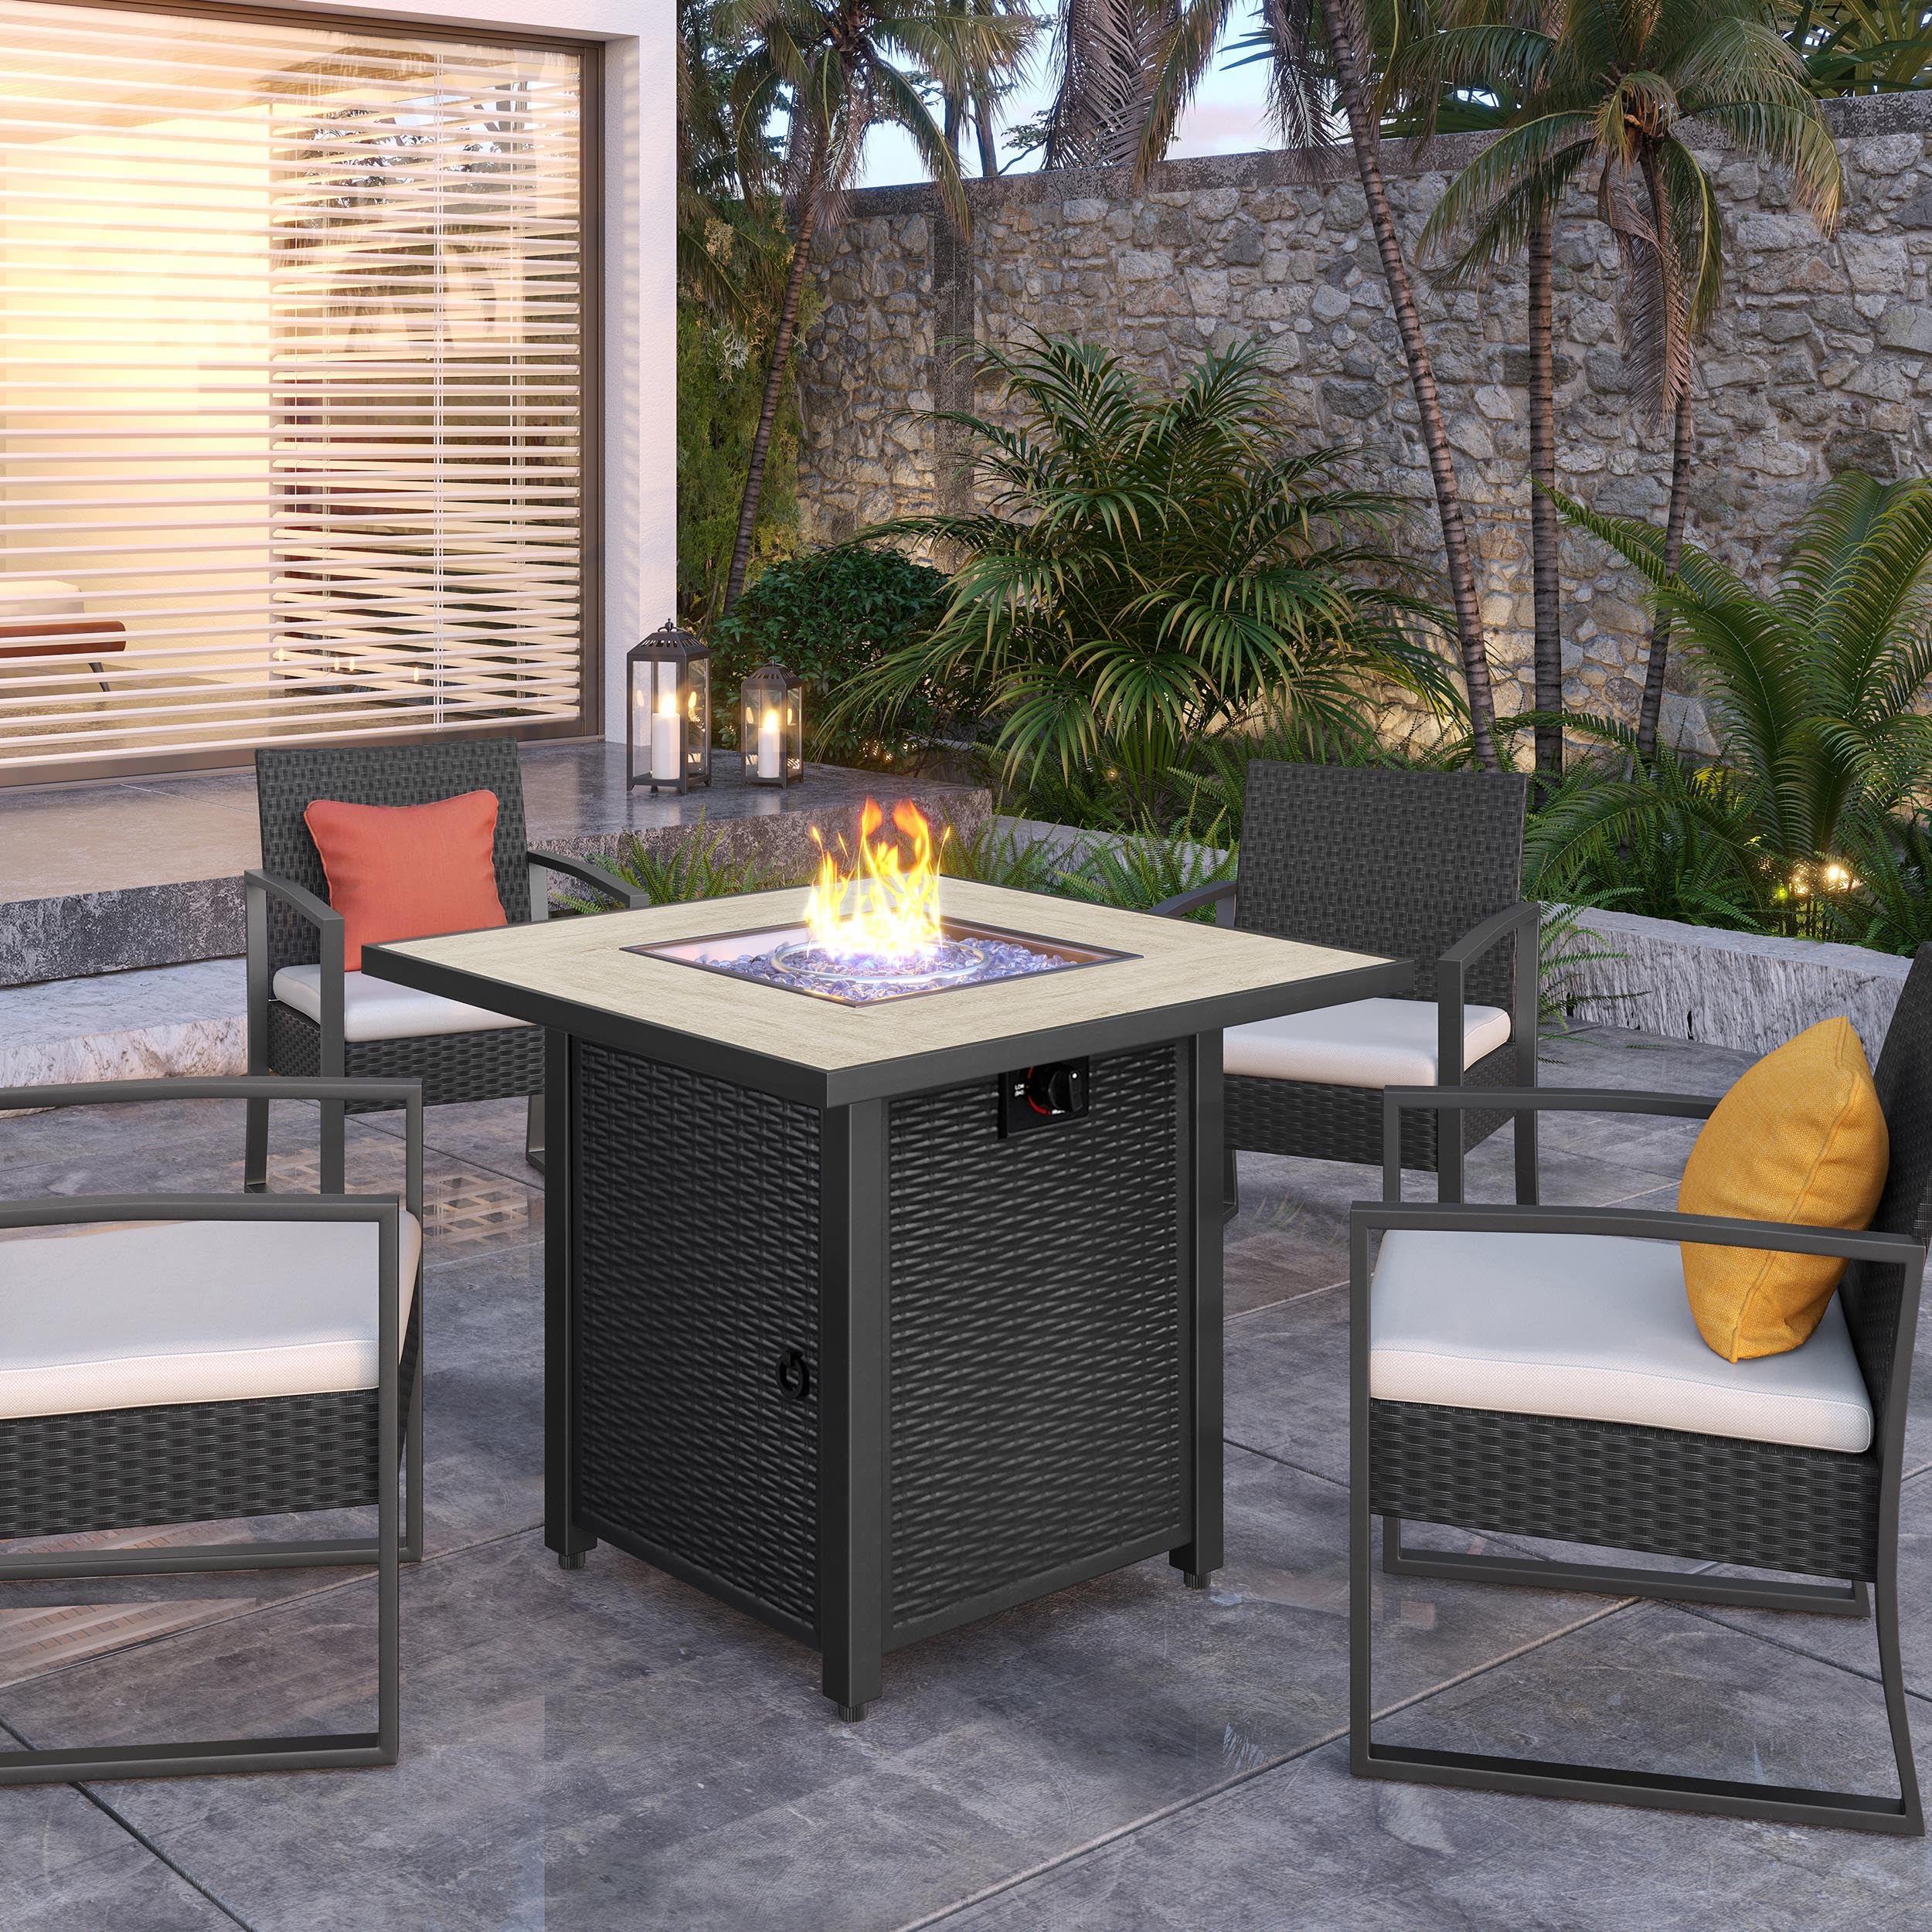 Yaheetech 30" Propane Gas Fire Pit Table 50,000 BTU Square Gas Fire Table with Ceramic Tabletop and Blue Fire Glass for Outdoor /Patio with Rattan Pattern Steel Base/Lid, Black